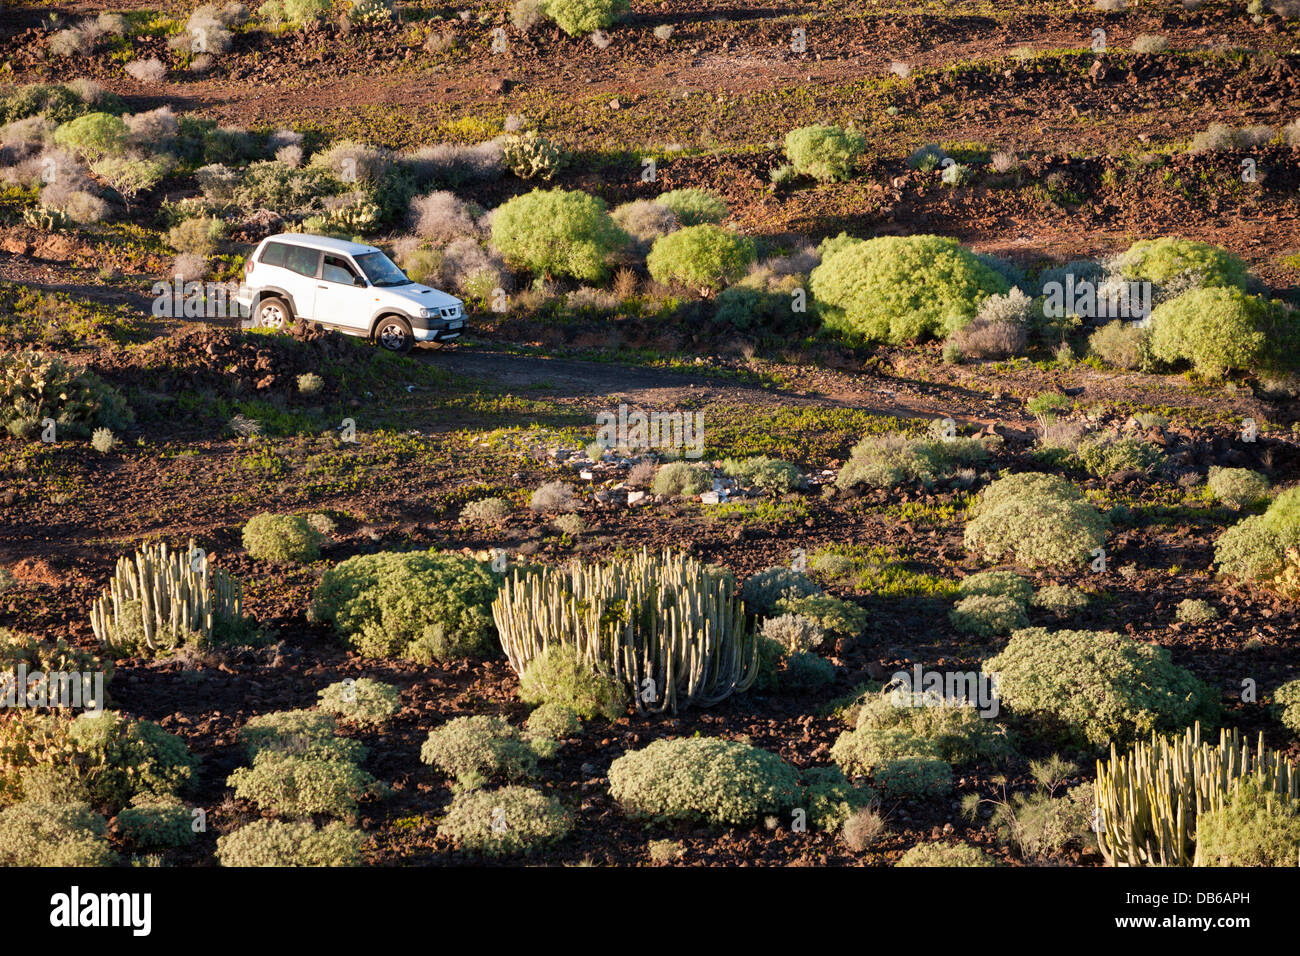 Tourists driving Car in Tenerife Wilderness, Tenerife, Canary Islands, Spain Stock Photo